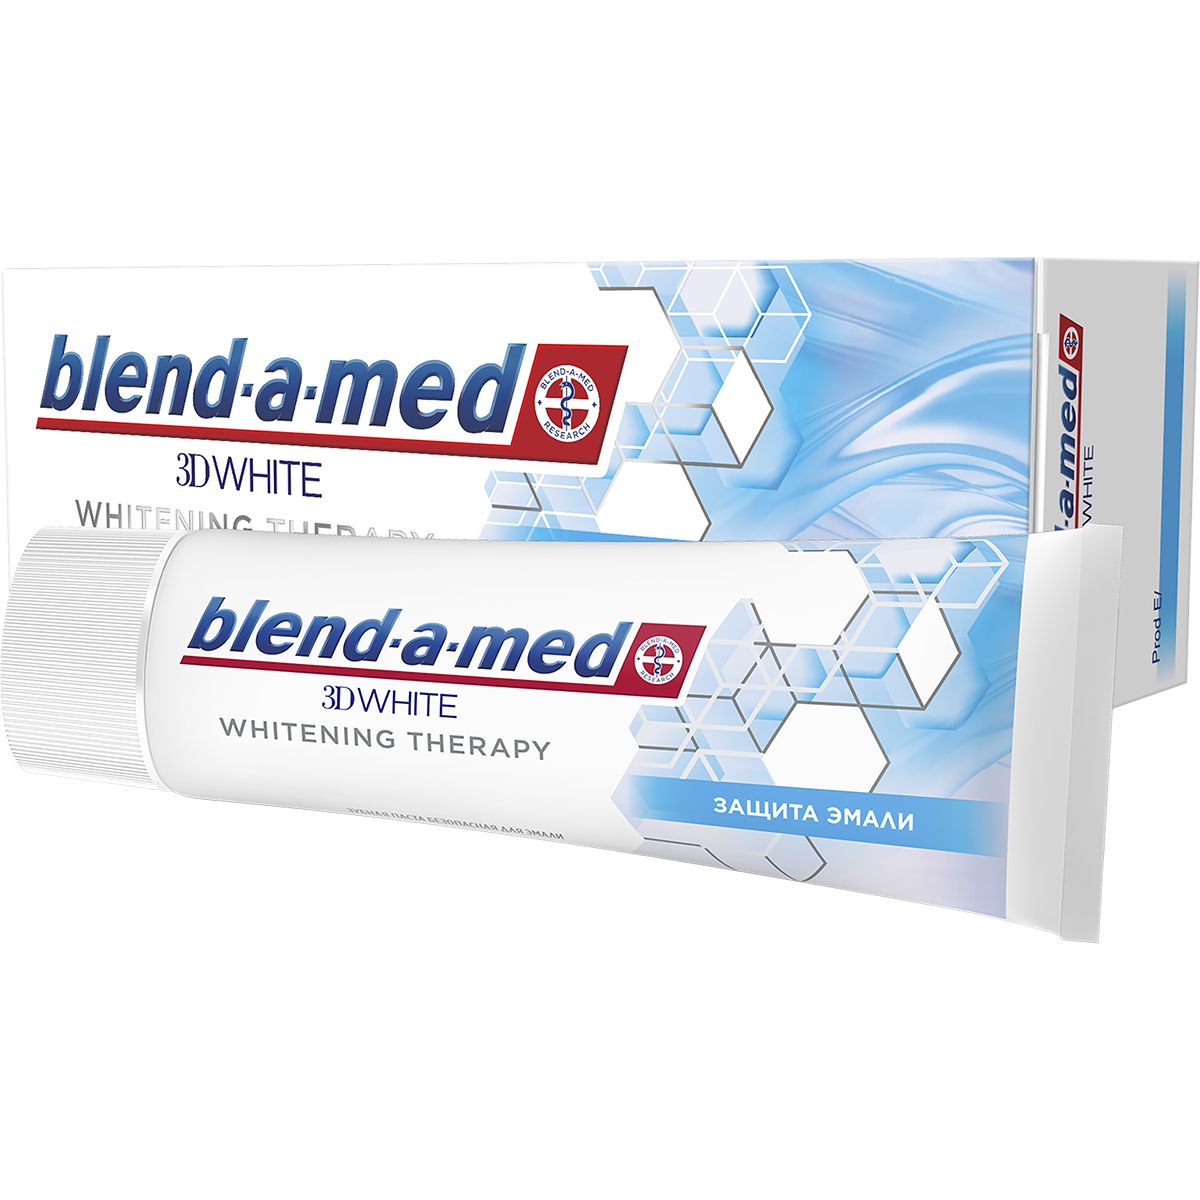 Зубна Паста Blend-a-med 3D White Whitening Therapy Захист зубної емалі 75 мл - фото 1